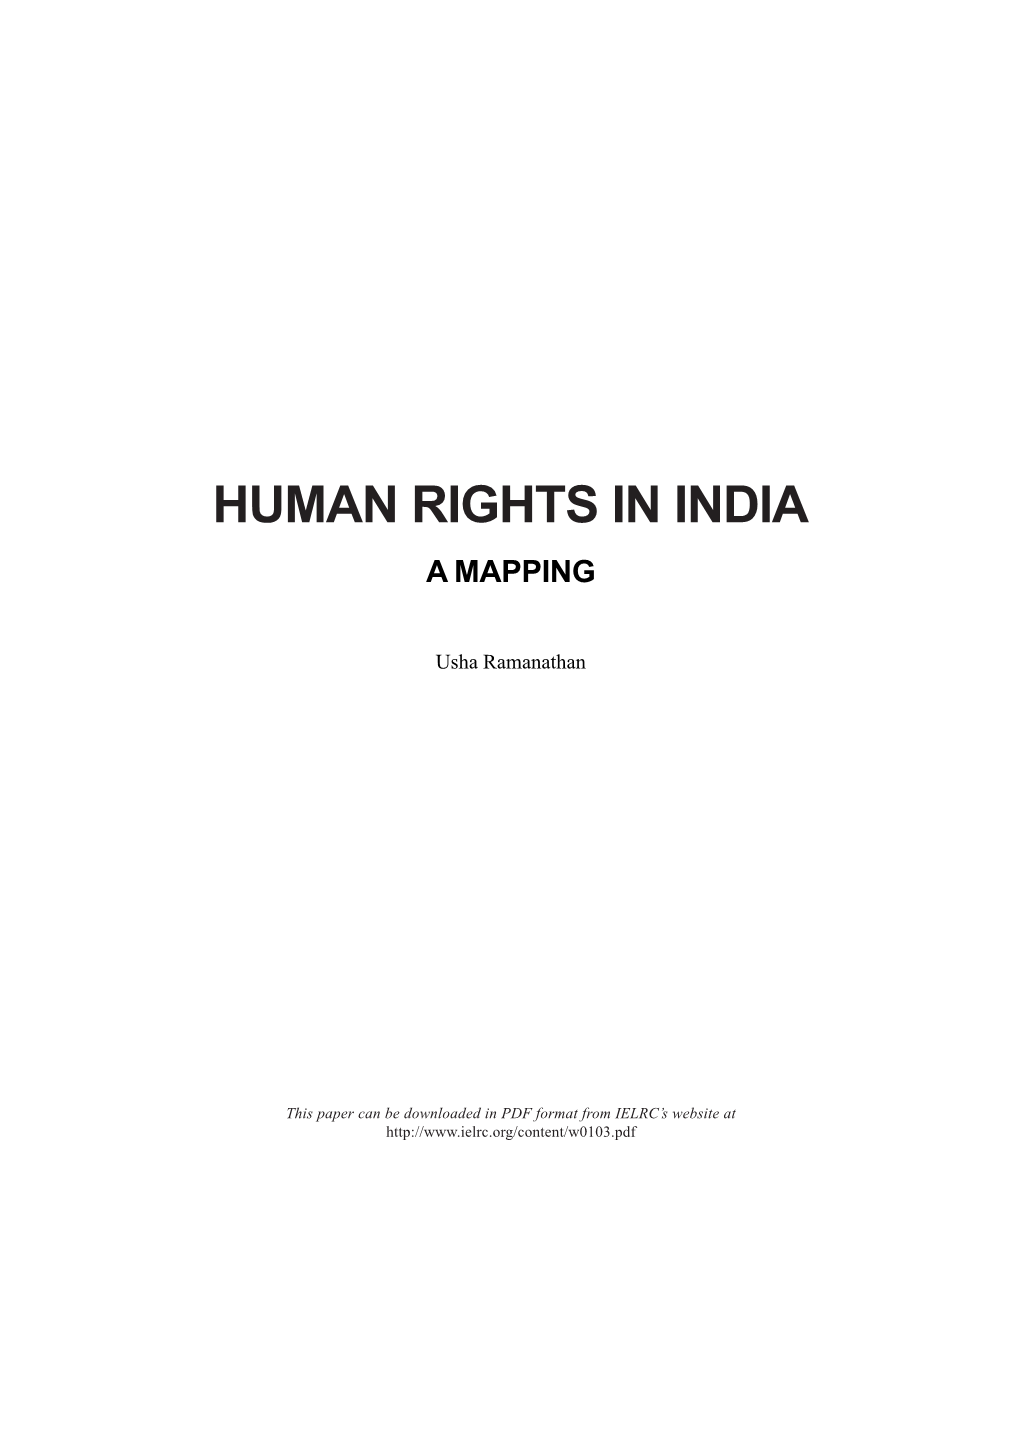 Human Rights in India a Mapping